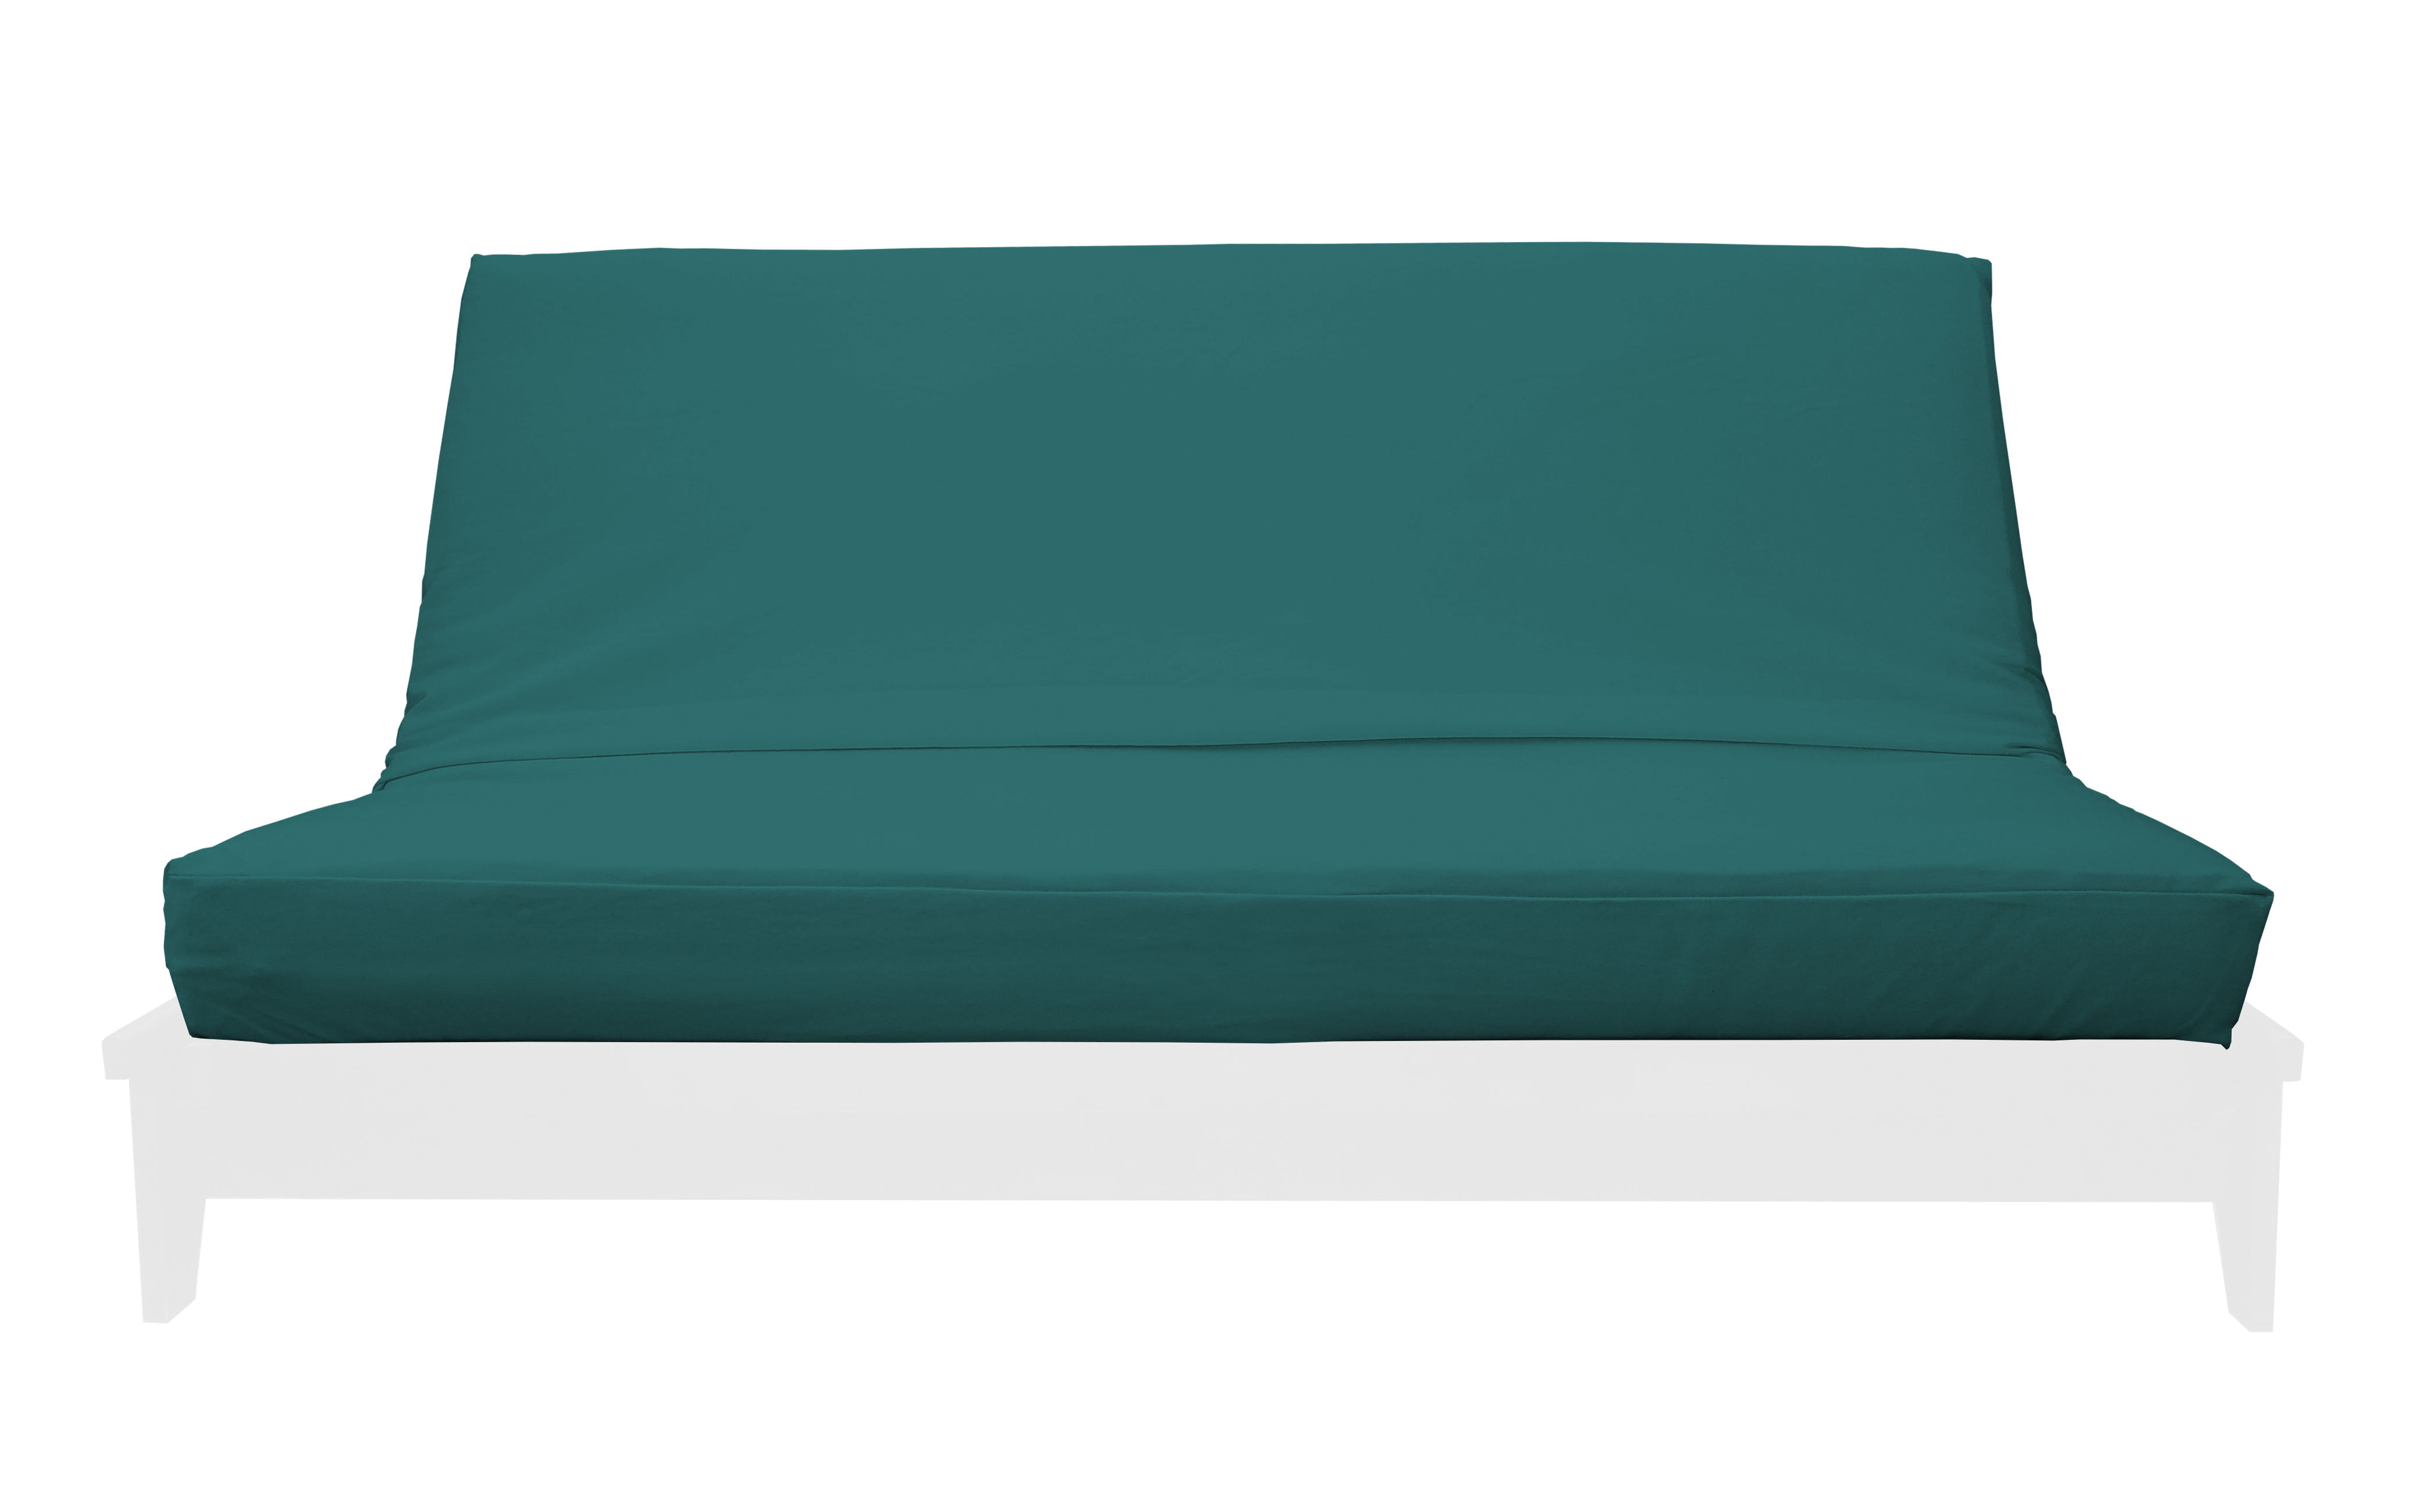 Turquoise Bed Covering Protectors Slipcovers Queen Futon Mattress Covers 